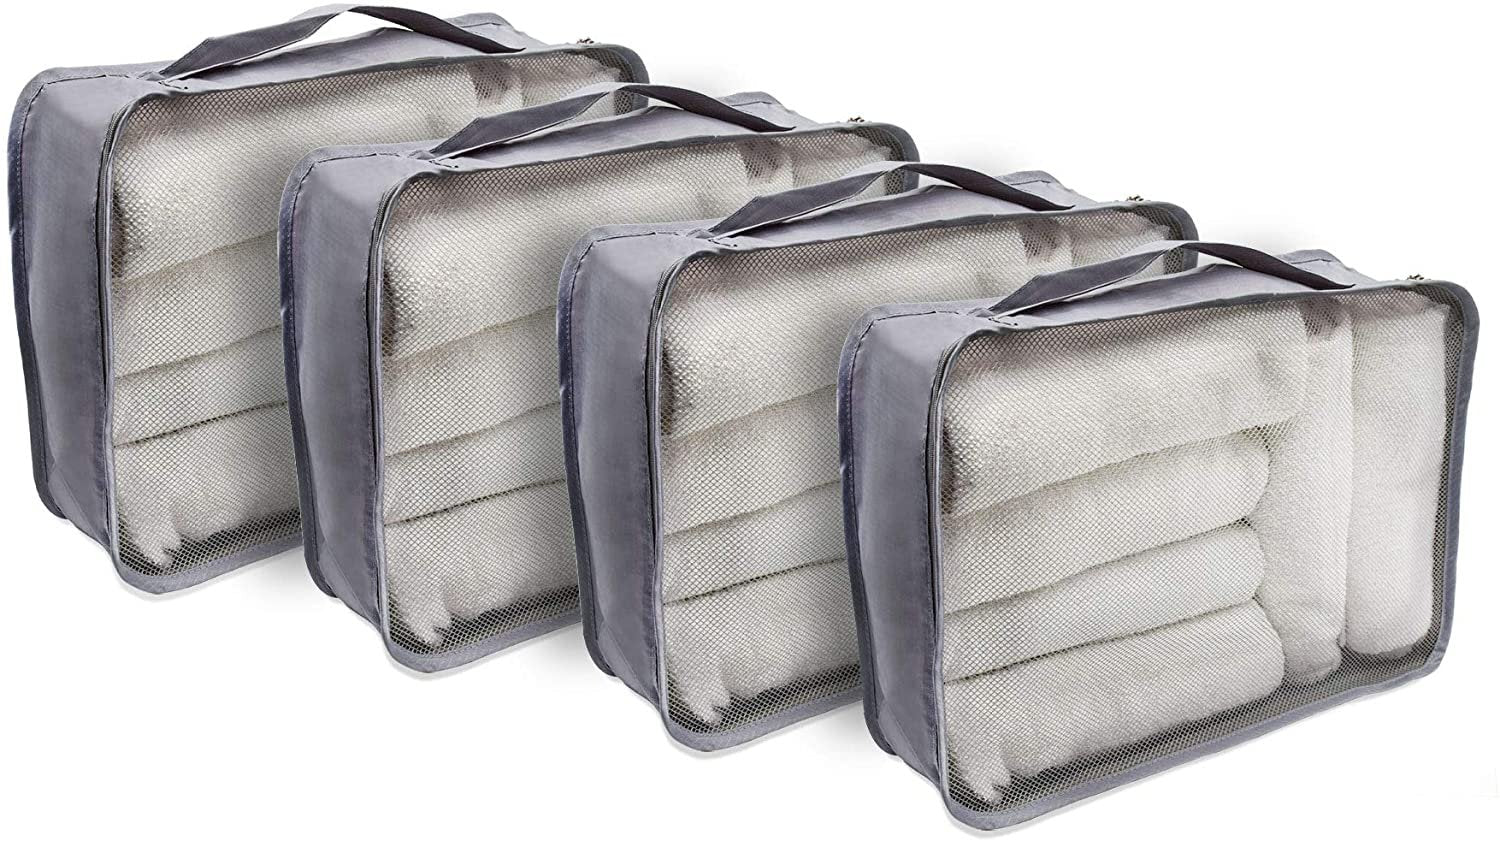 High-Capacity Gray Packing Cubes - 4 Pc Set, Large - Foldable, Lightweight Travel Organizers